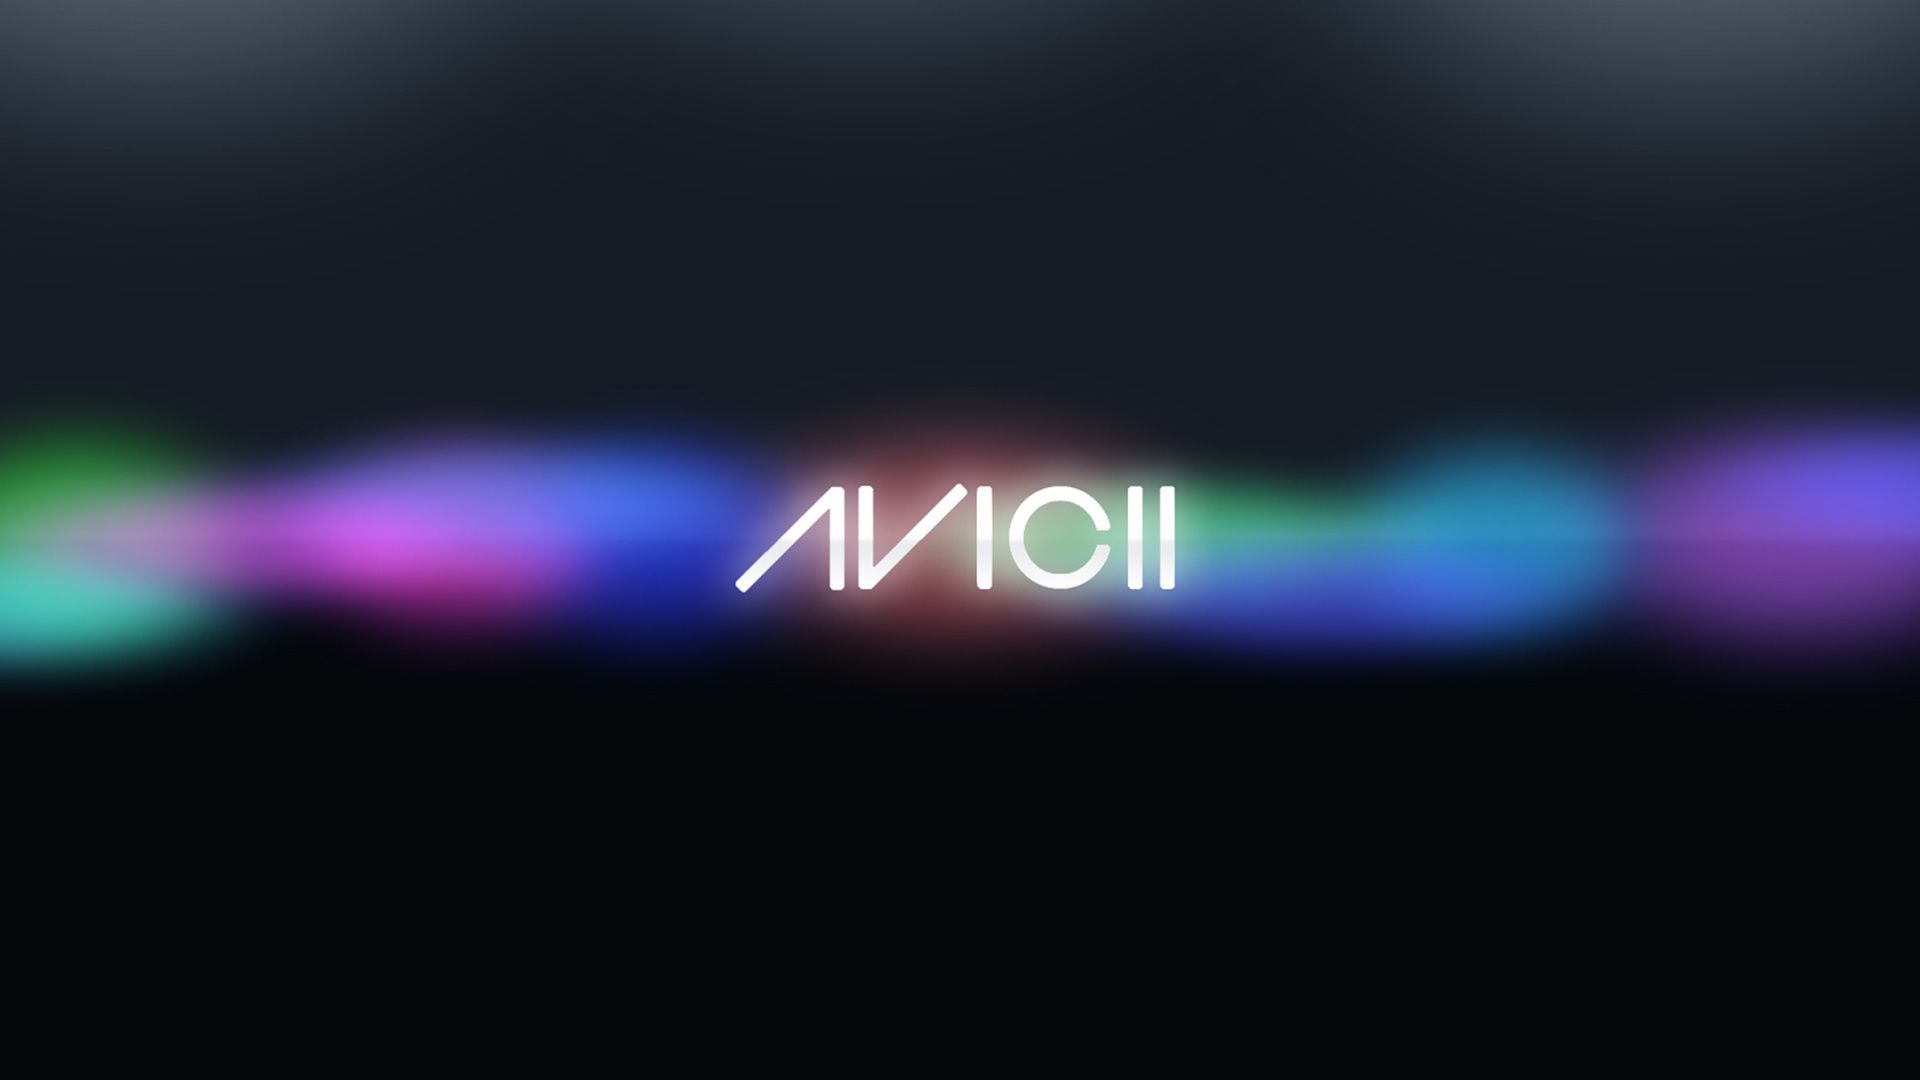 Avicii Wallpapers Image Photos Pictures Backgrounds.